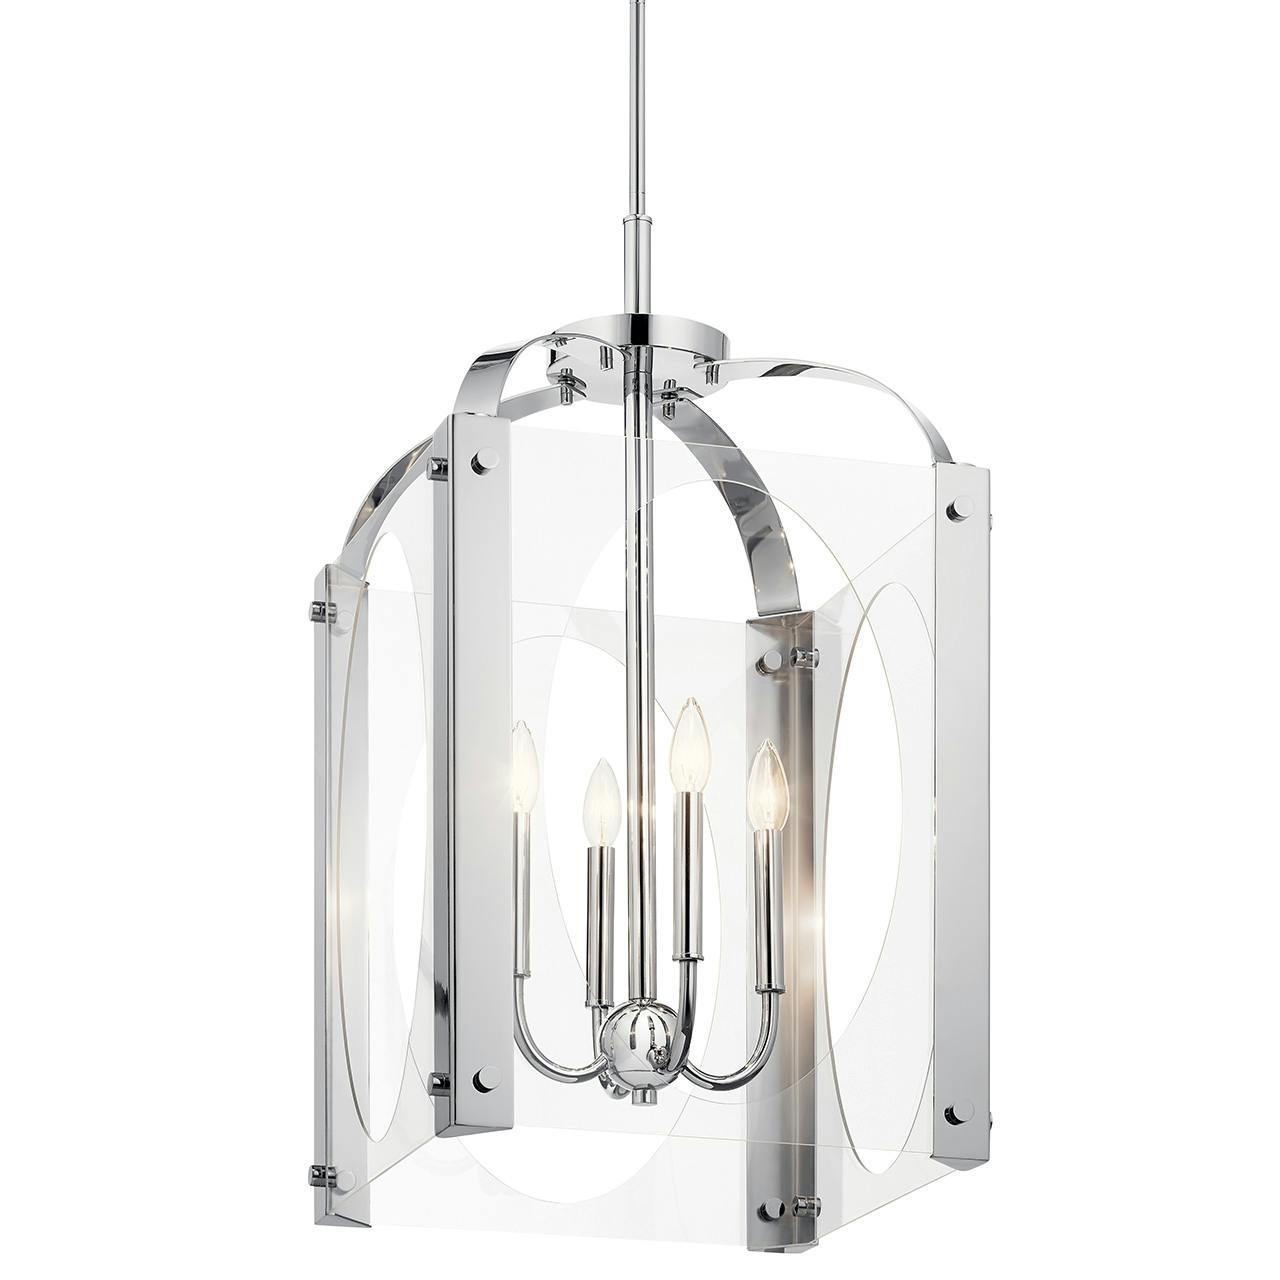 Pytel™ 4 Light Foyer Pendant Chrome without the canopy on a white background